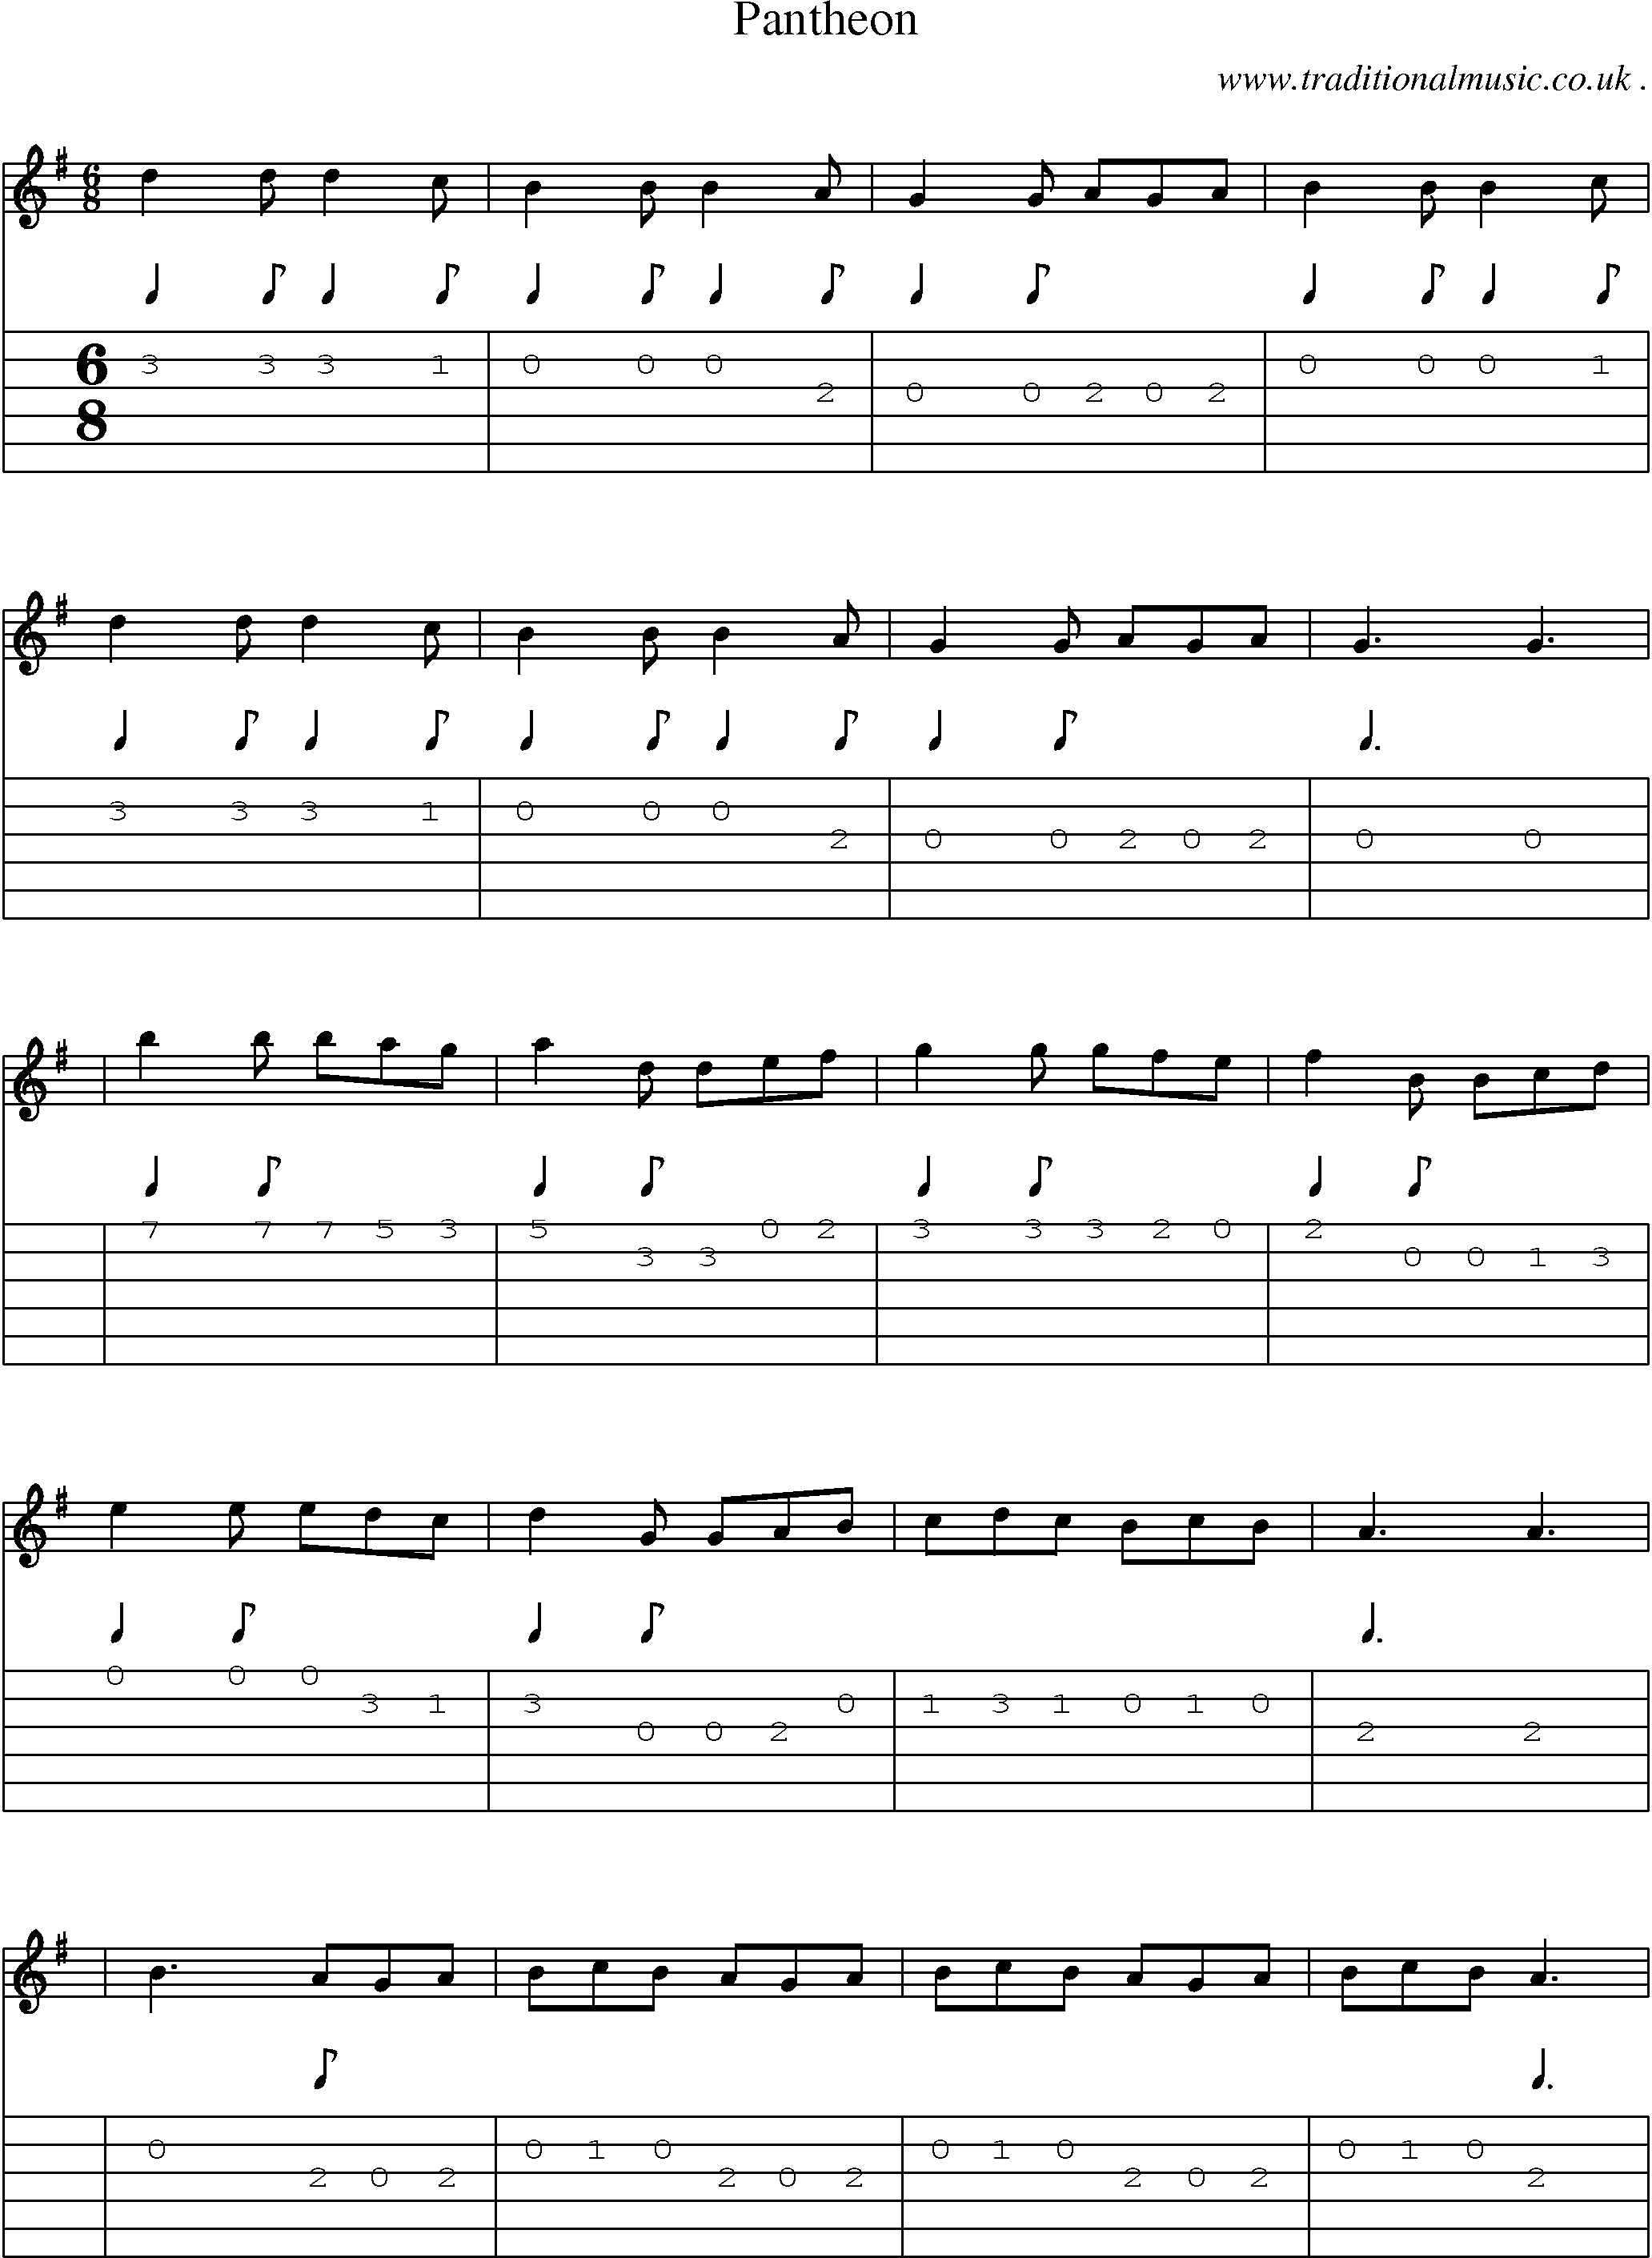 Sheet-Music and Guitar Tabs for Pantheon